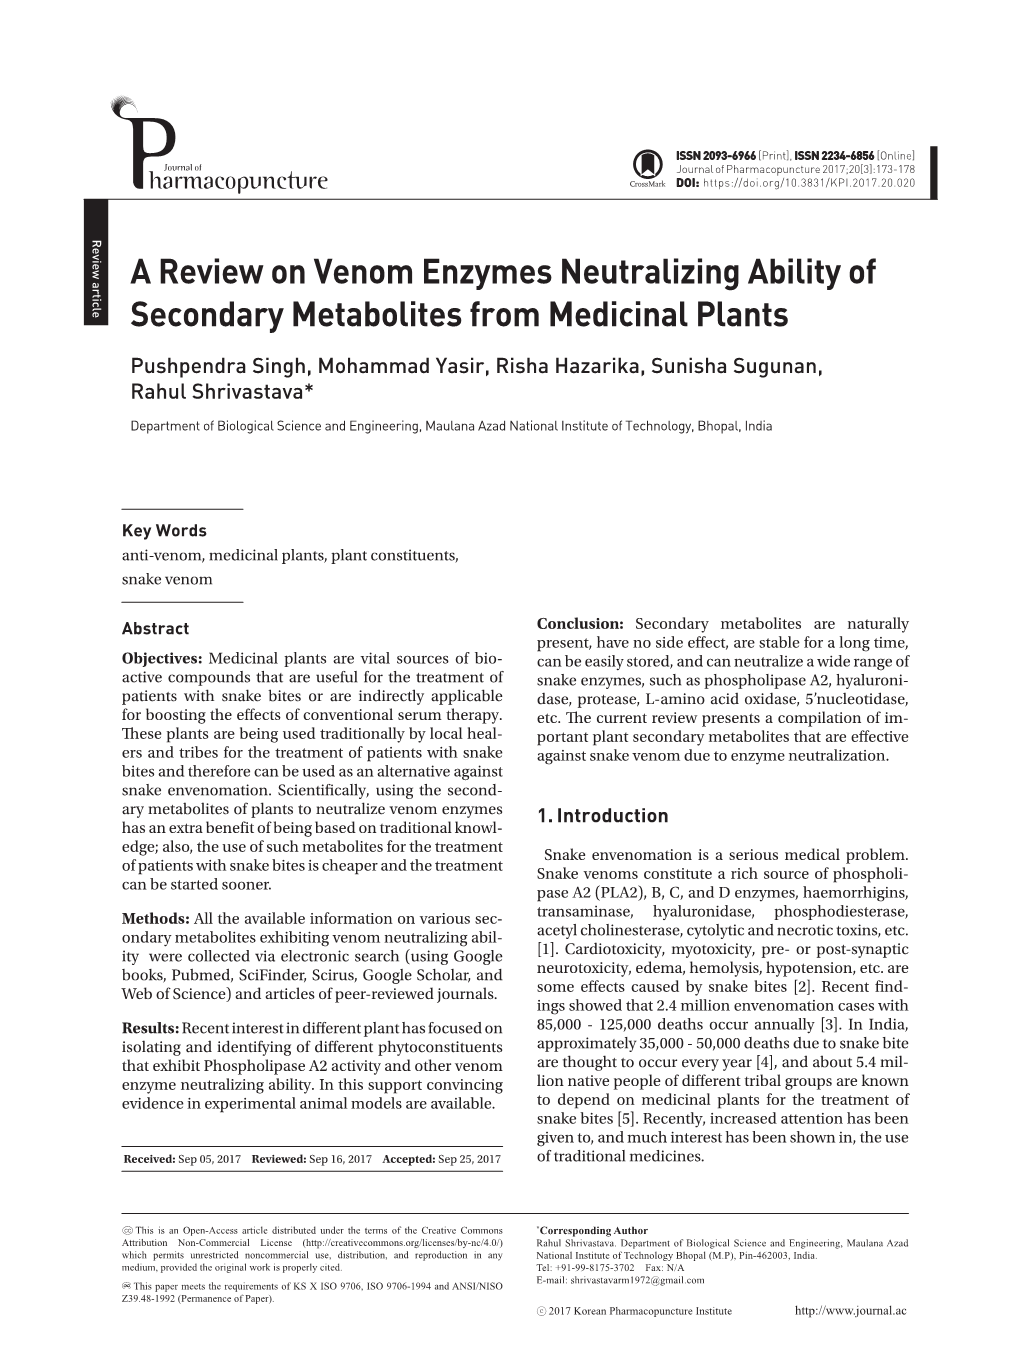 A Review on Venom Enzymes Neutralizing Ability of Secondary Metabolites from Medicinal Plants